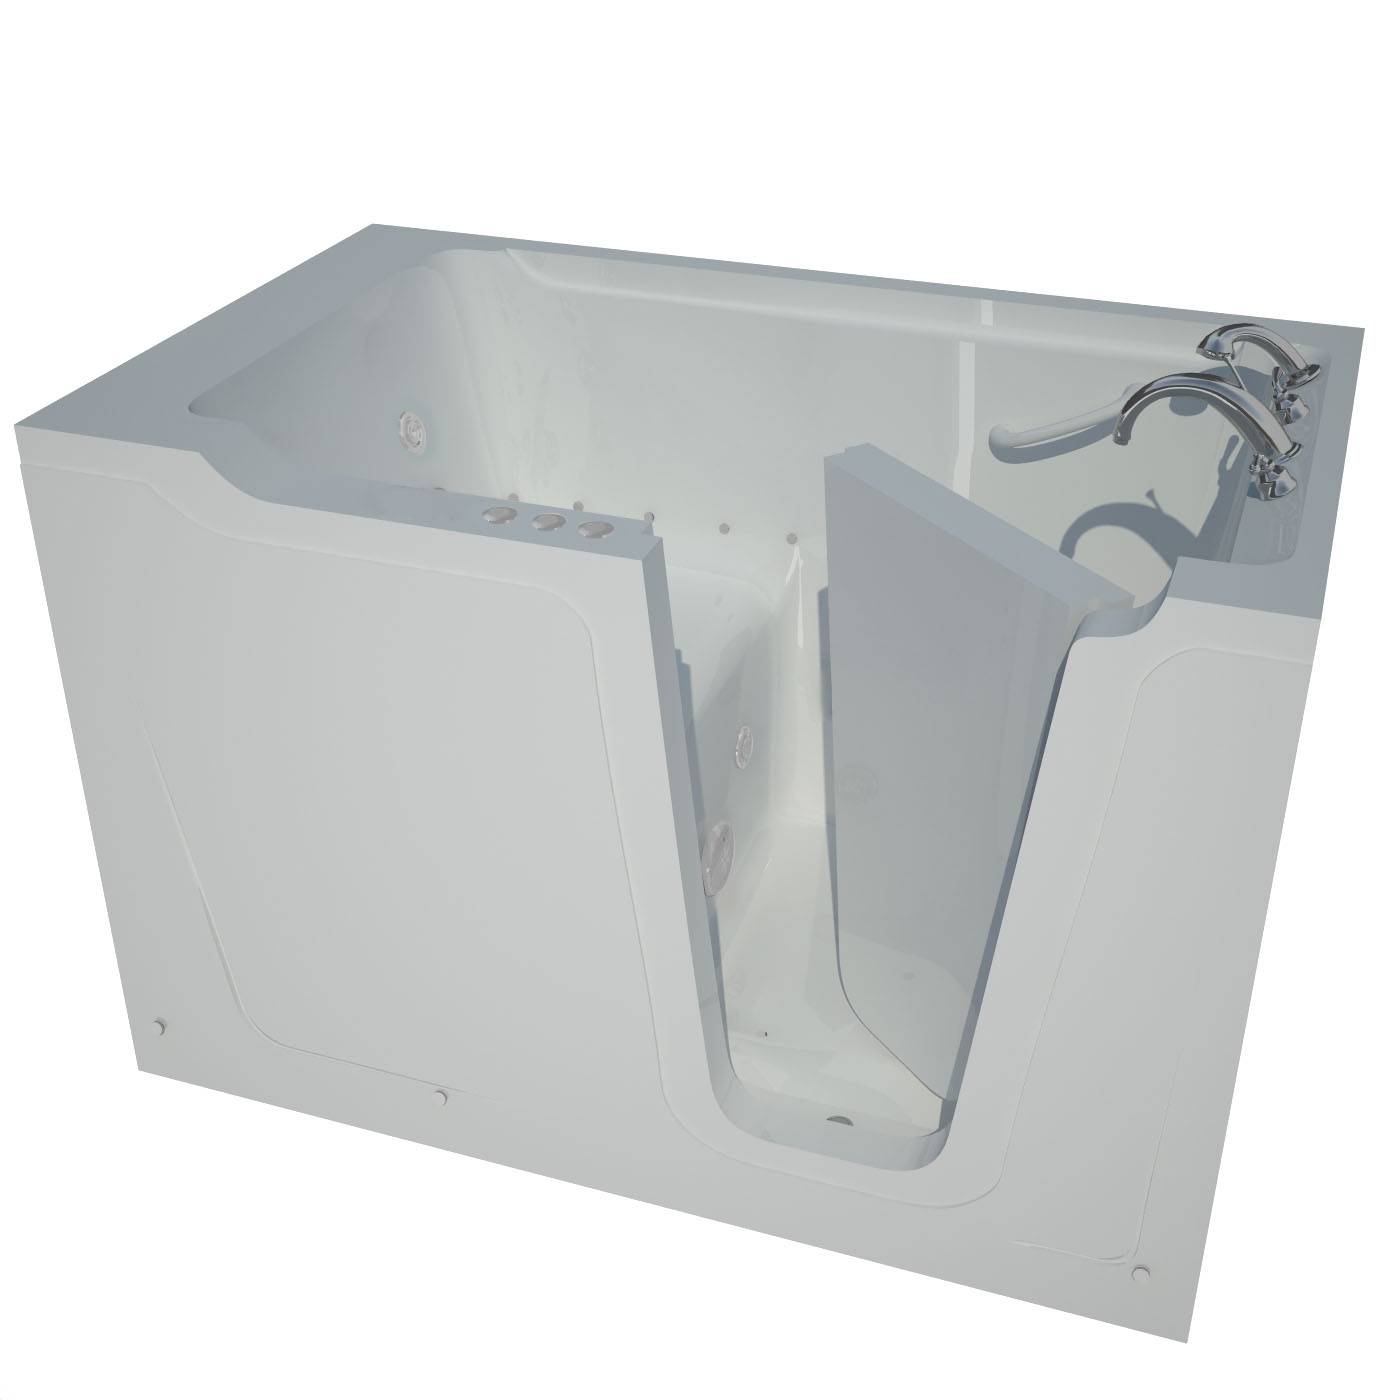 36 x 60 Right Drain Whirlpool & Air Jetted Walk-In Bathtub in White